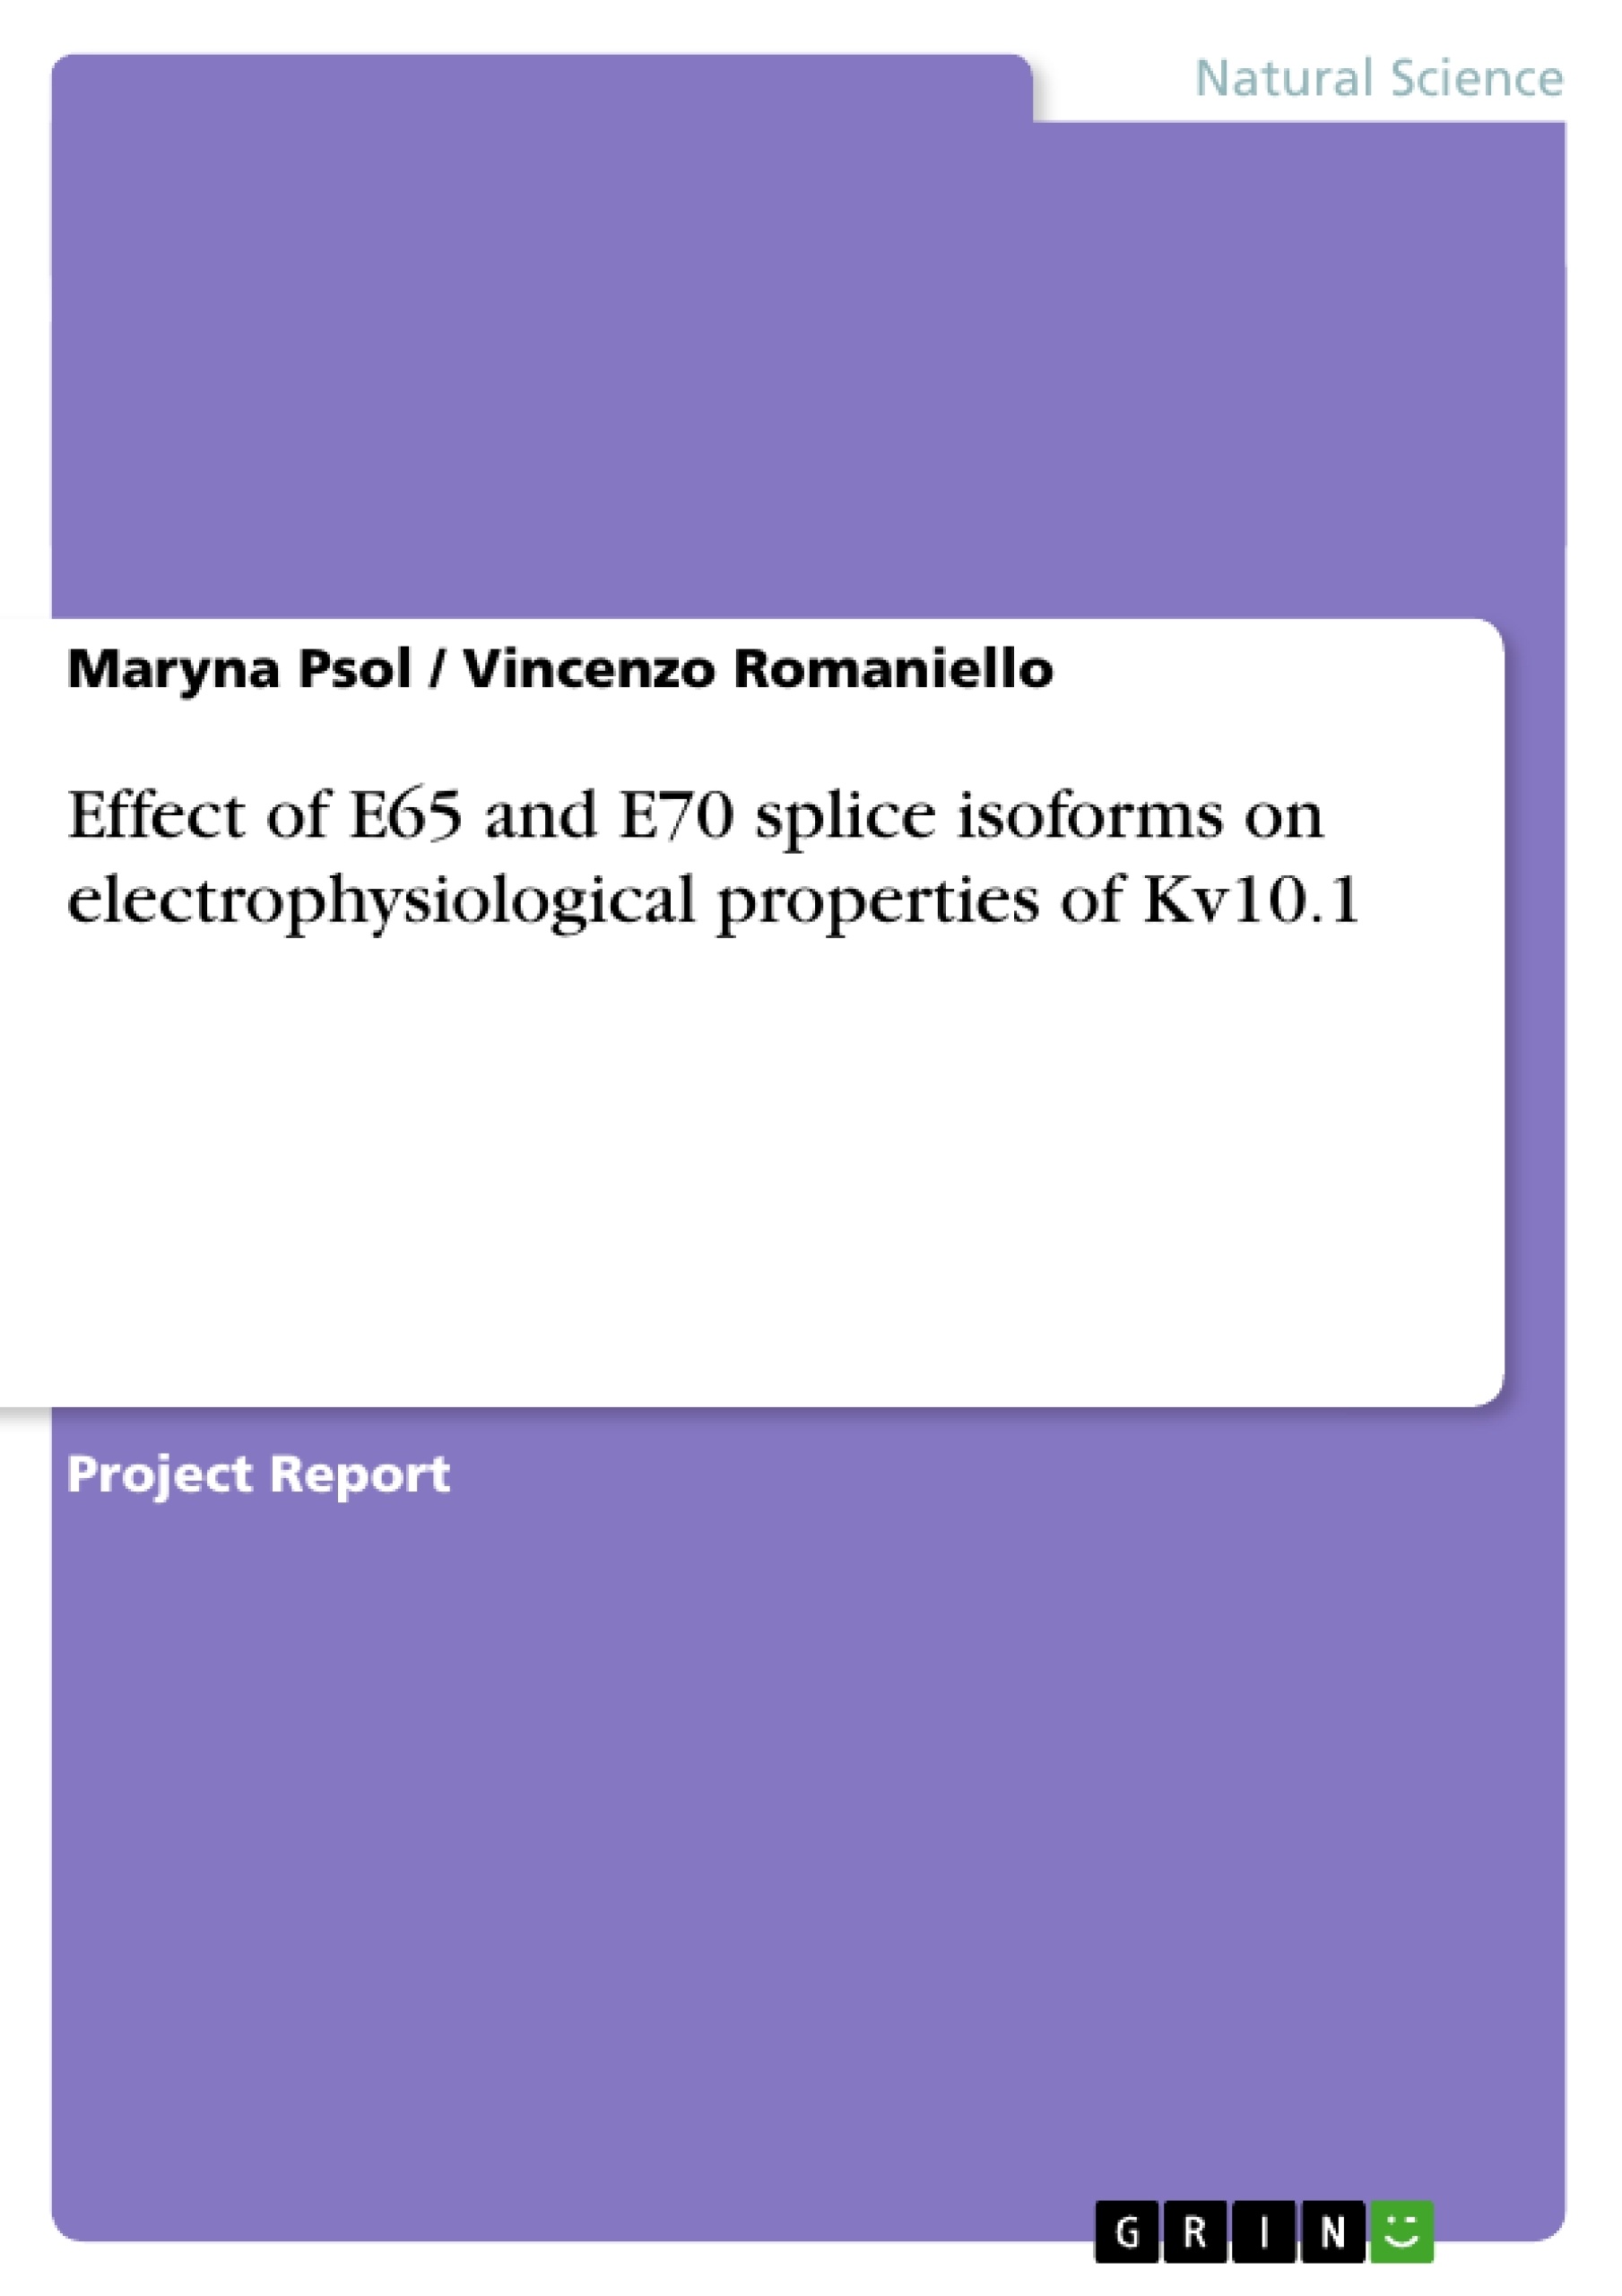 Title: Effect of E65 and E70 splice isoforms on electrophysiological properties of Kv10.1